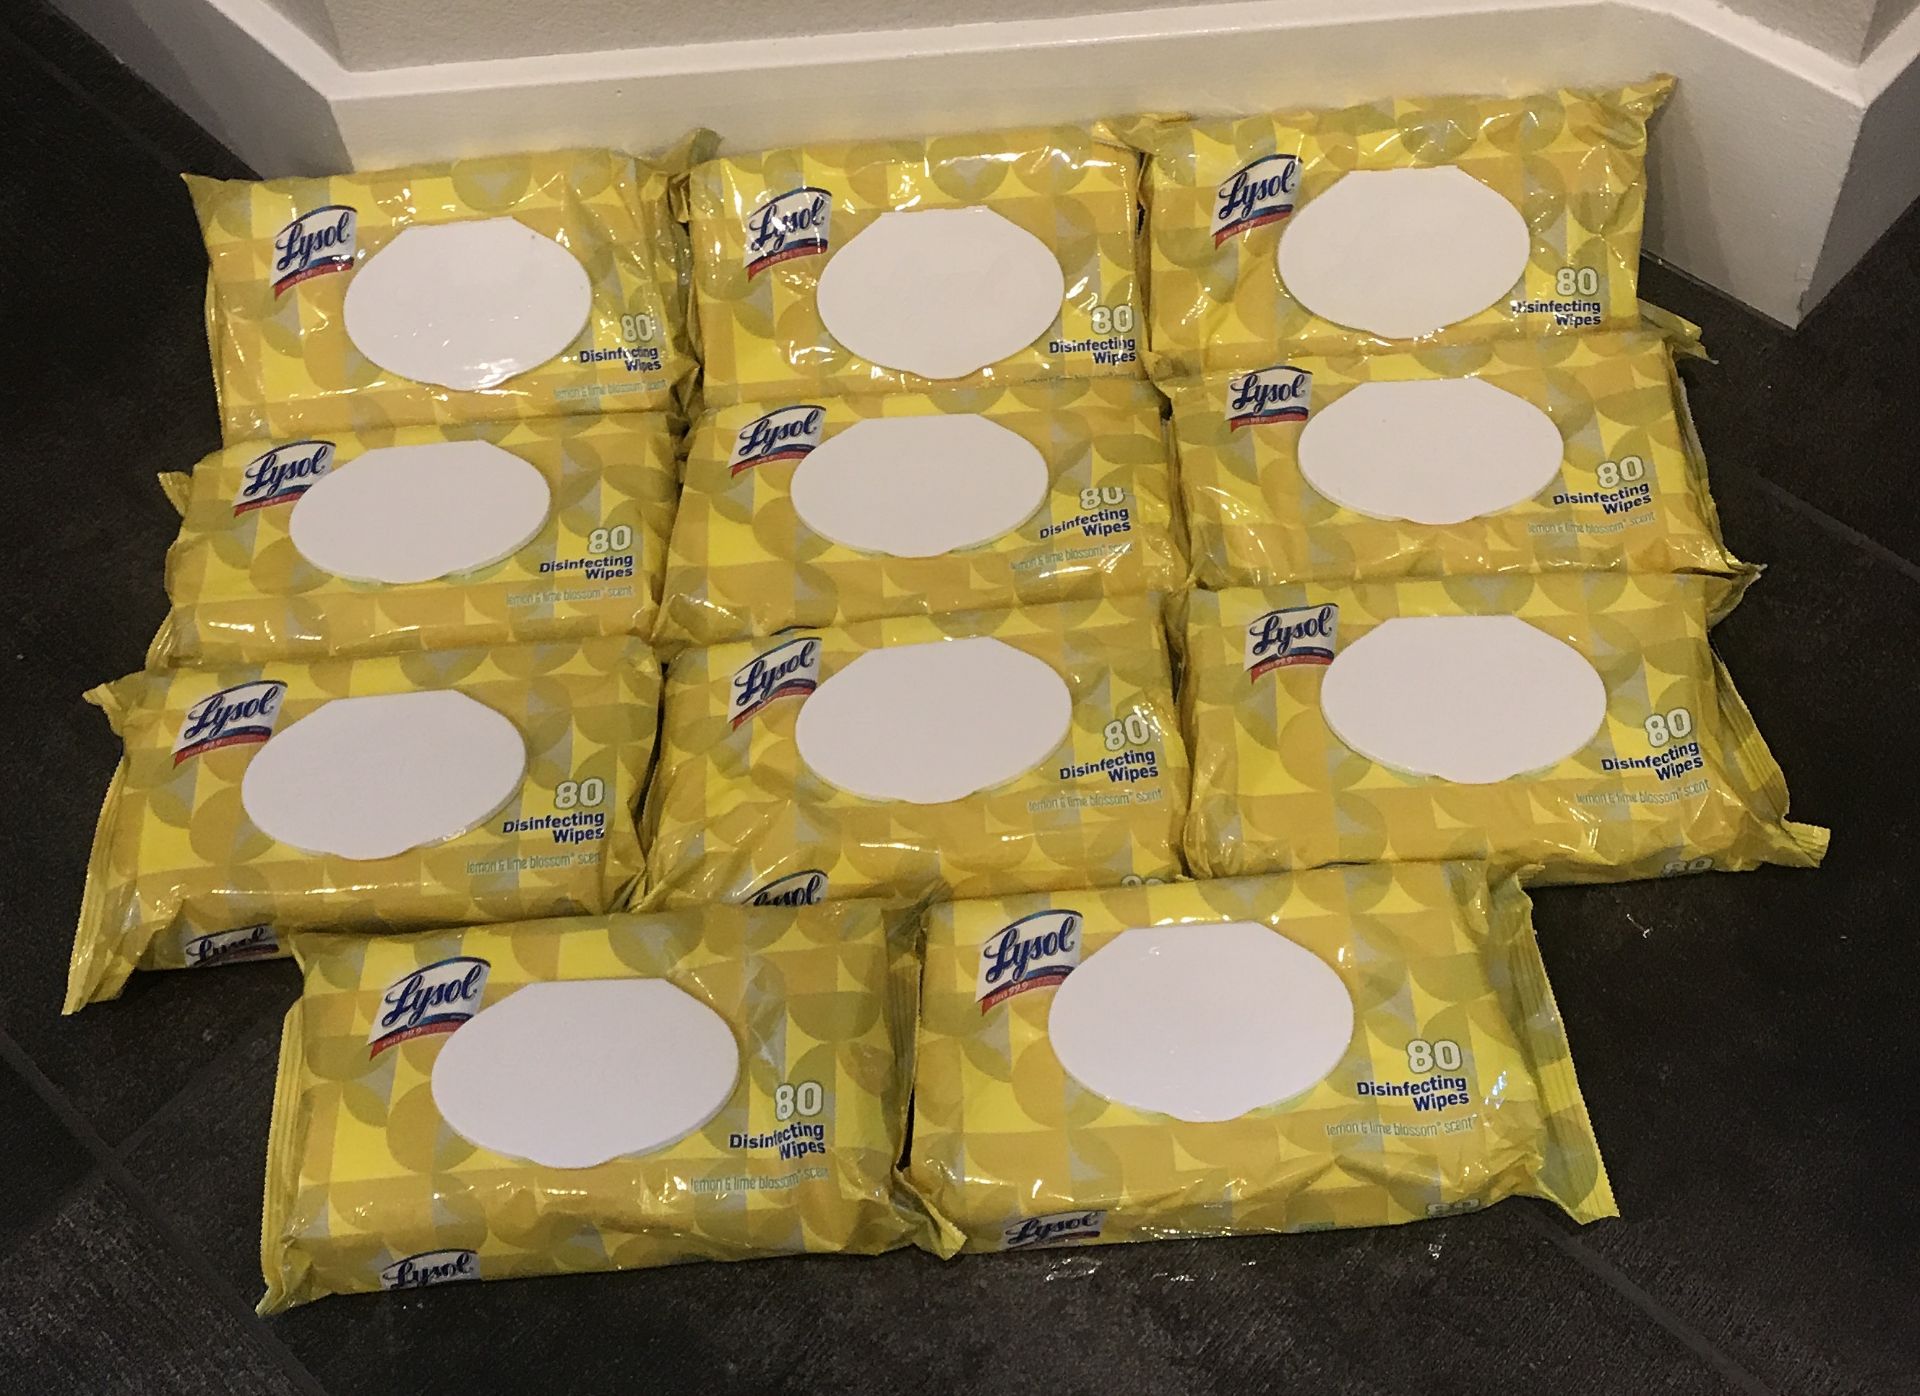 LOT OF 11 LYSOL DISINFECTANT WIPES 80 PER PACKAGE LEMON AND BLOSSOM SCENT